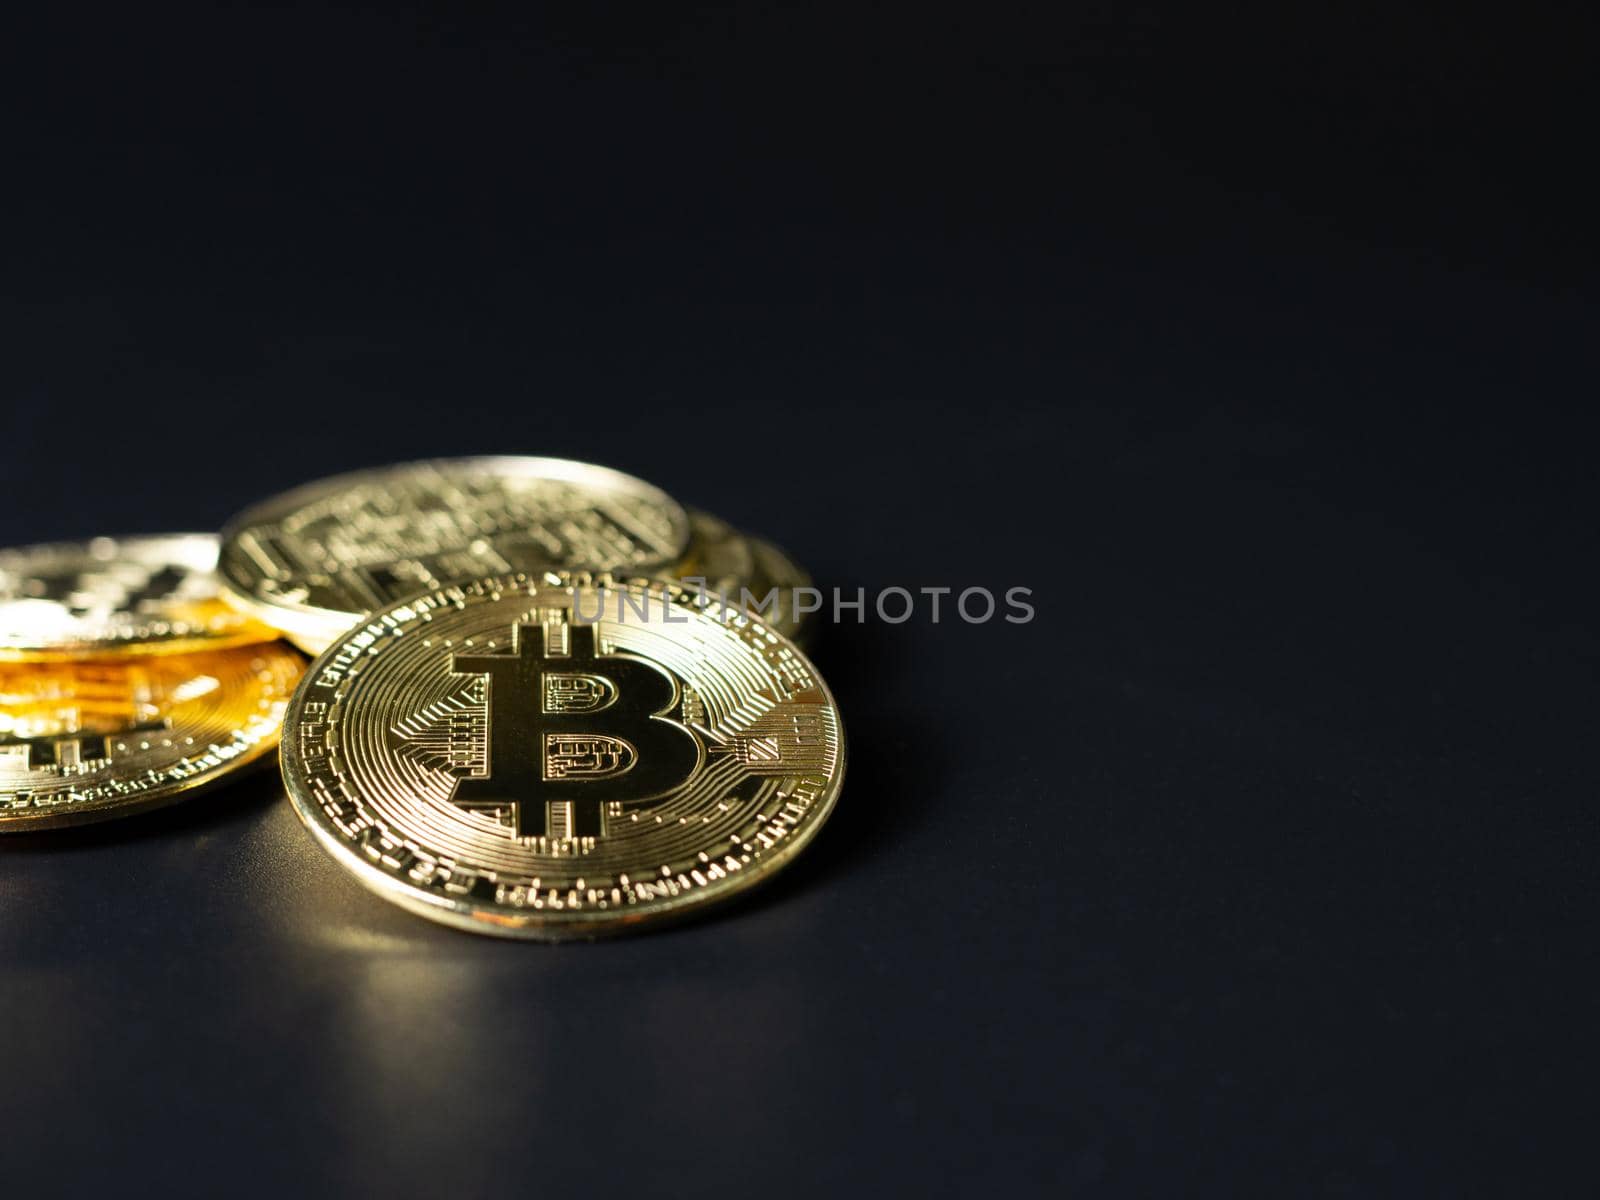 Bitcoin Coins as Cryptocurrency placed on a black background by Unimages2527